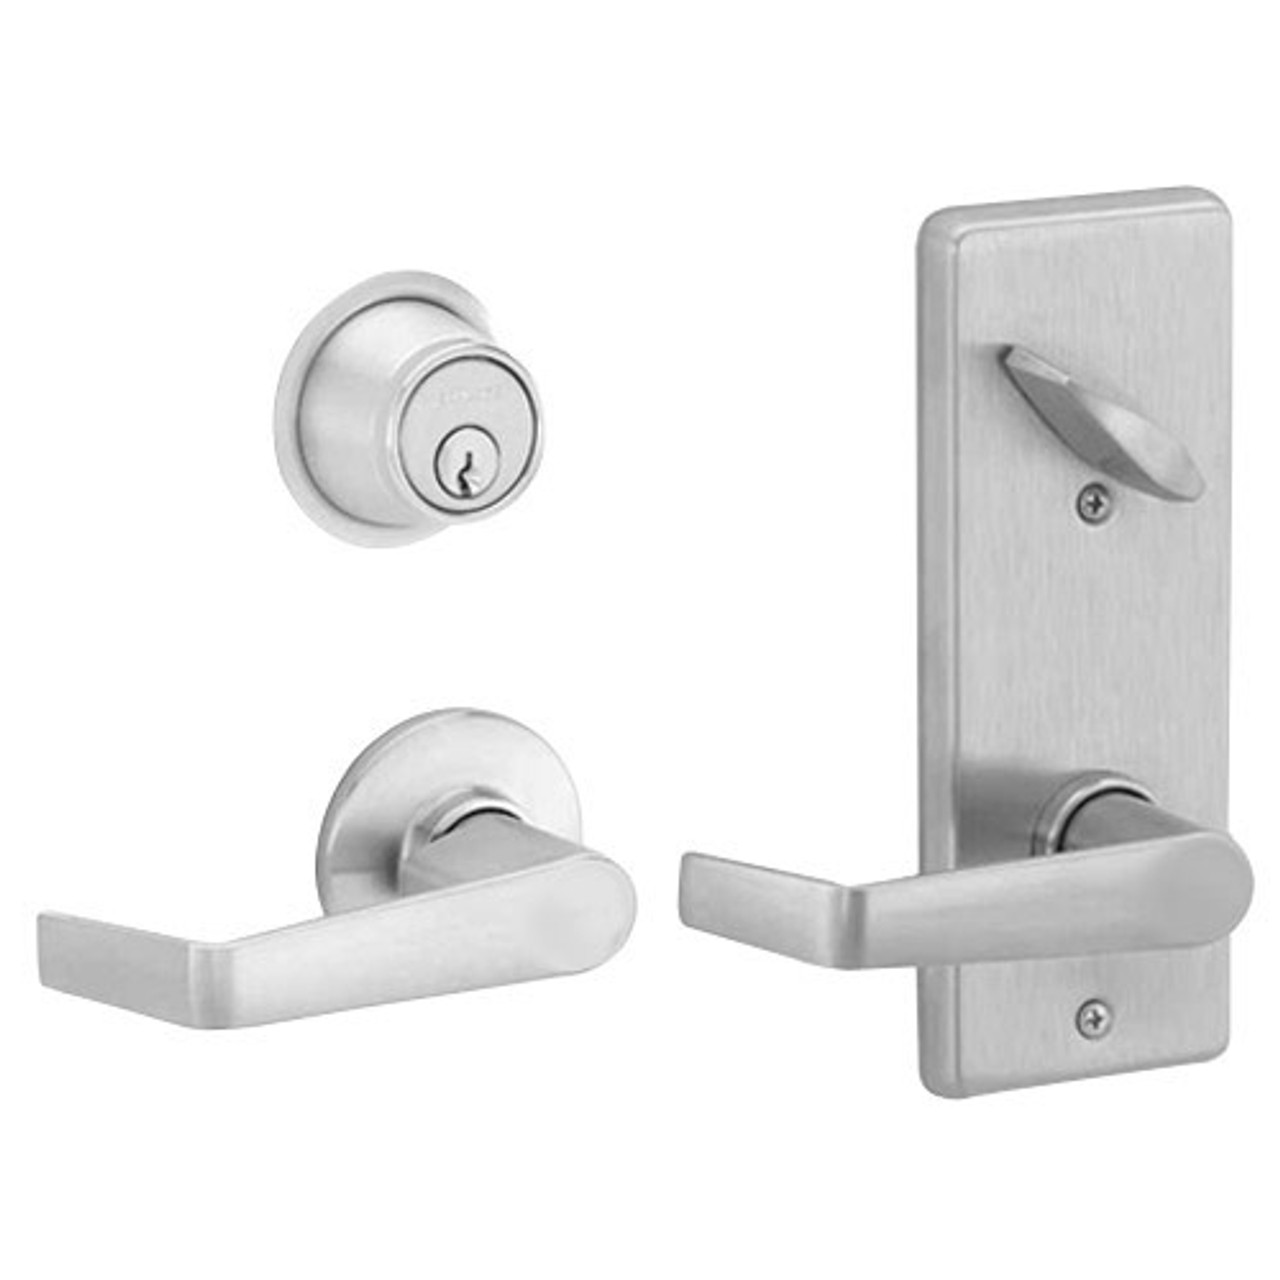 S210PD-SAT-619 Schlage S210PD Saturn Style Interconnected Lock in Satin Nickel